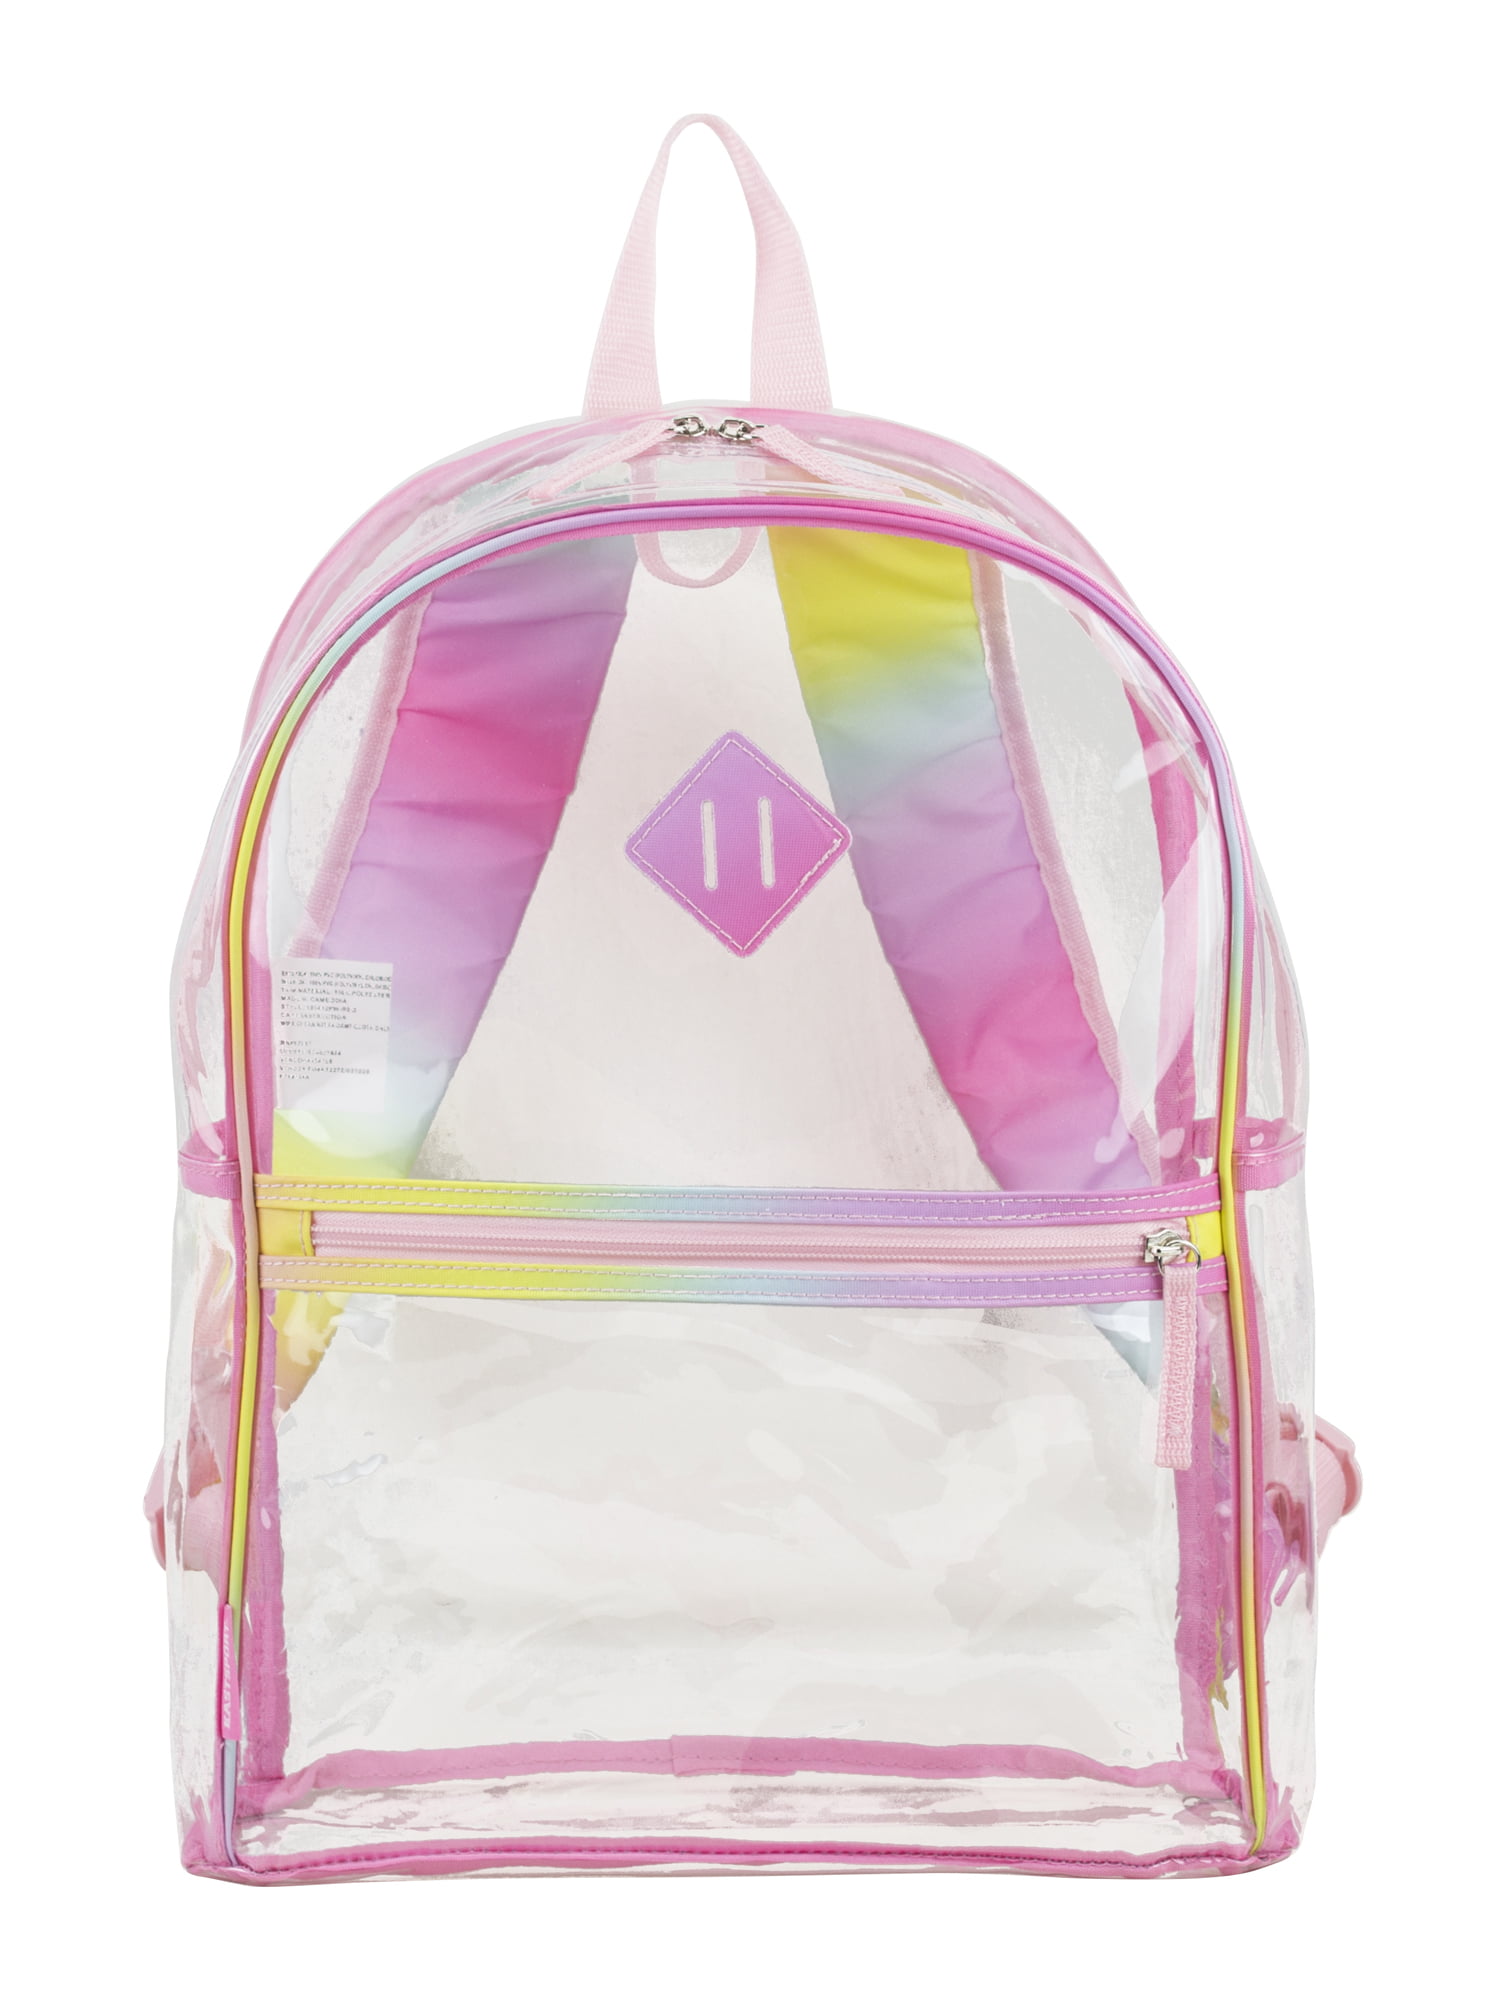 Eastsport Multi-Purpose Clear Backpack with Flame Sling Sackpack 